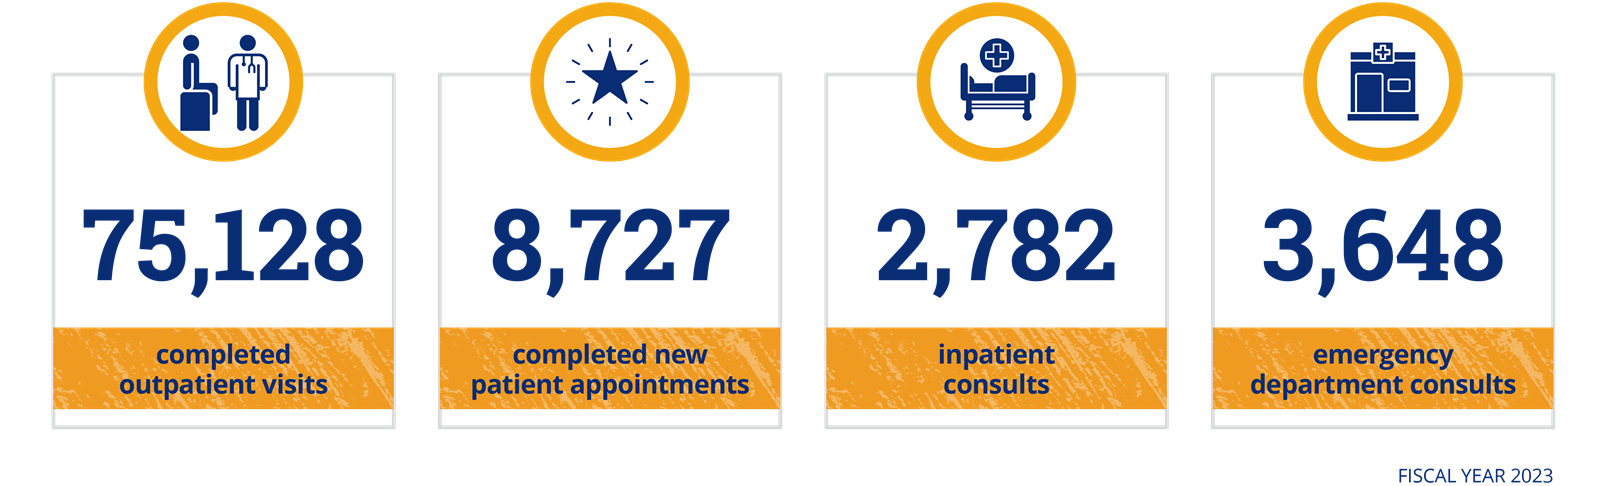 Infographic: 75,128 outpatient visits; 8,727 new patient visits; 2,782 inpatient consults; 3,648 emergency department consults